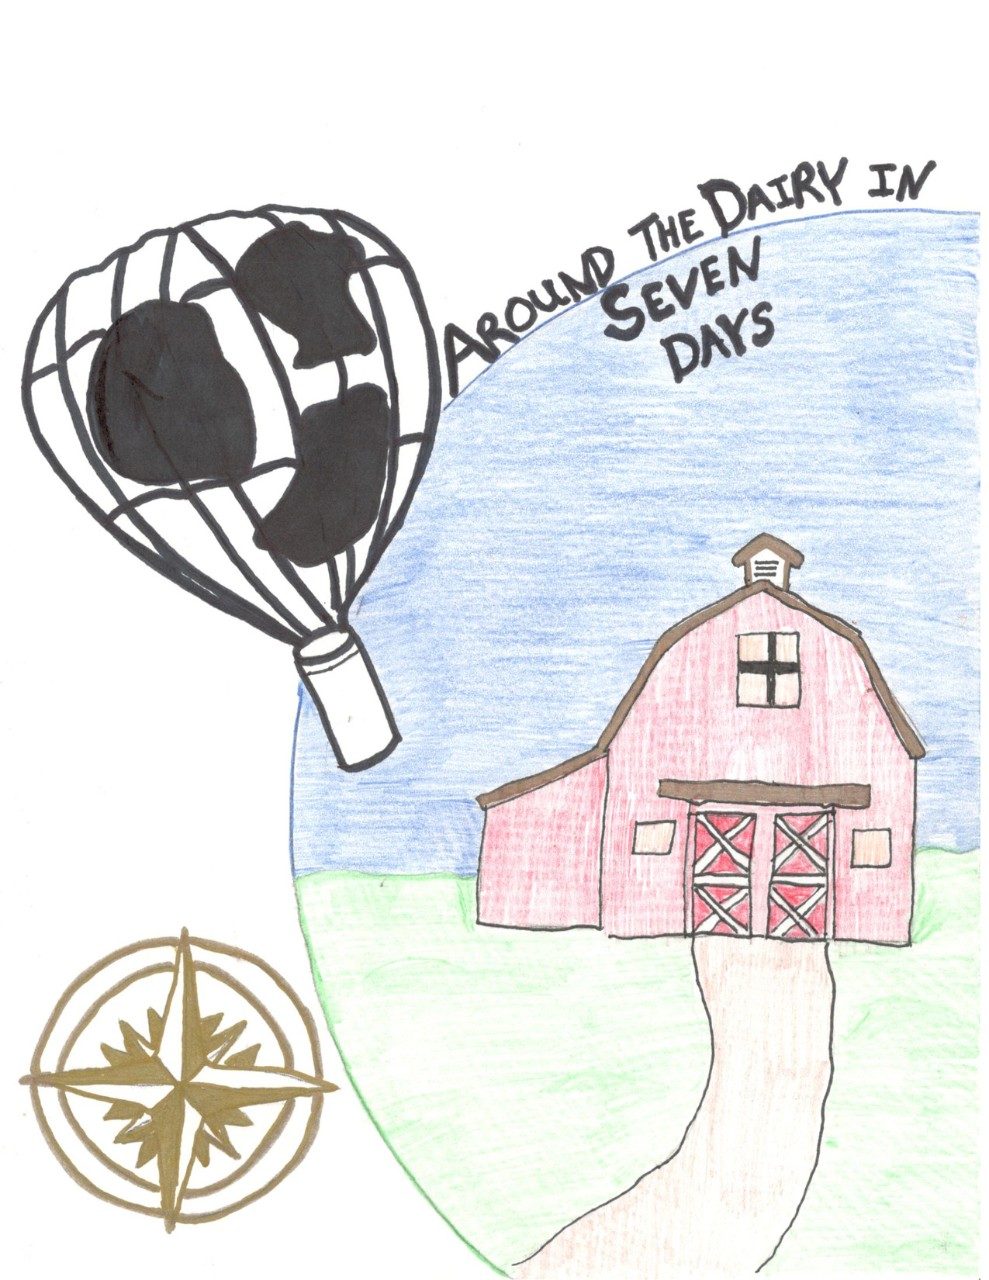 2023 June Dairy Month Poster Contest. Around the Dairy in 7 Days. Ethan Ferris, Frederick County, Intermediate Division. Third Place.